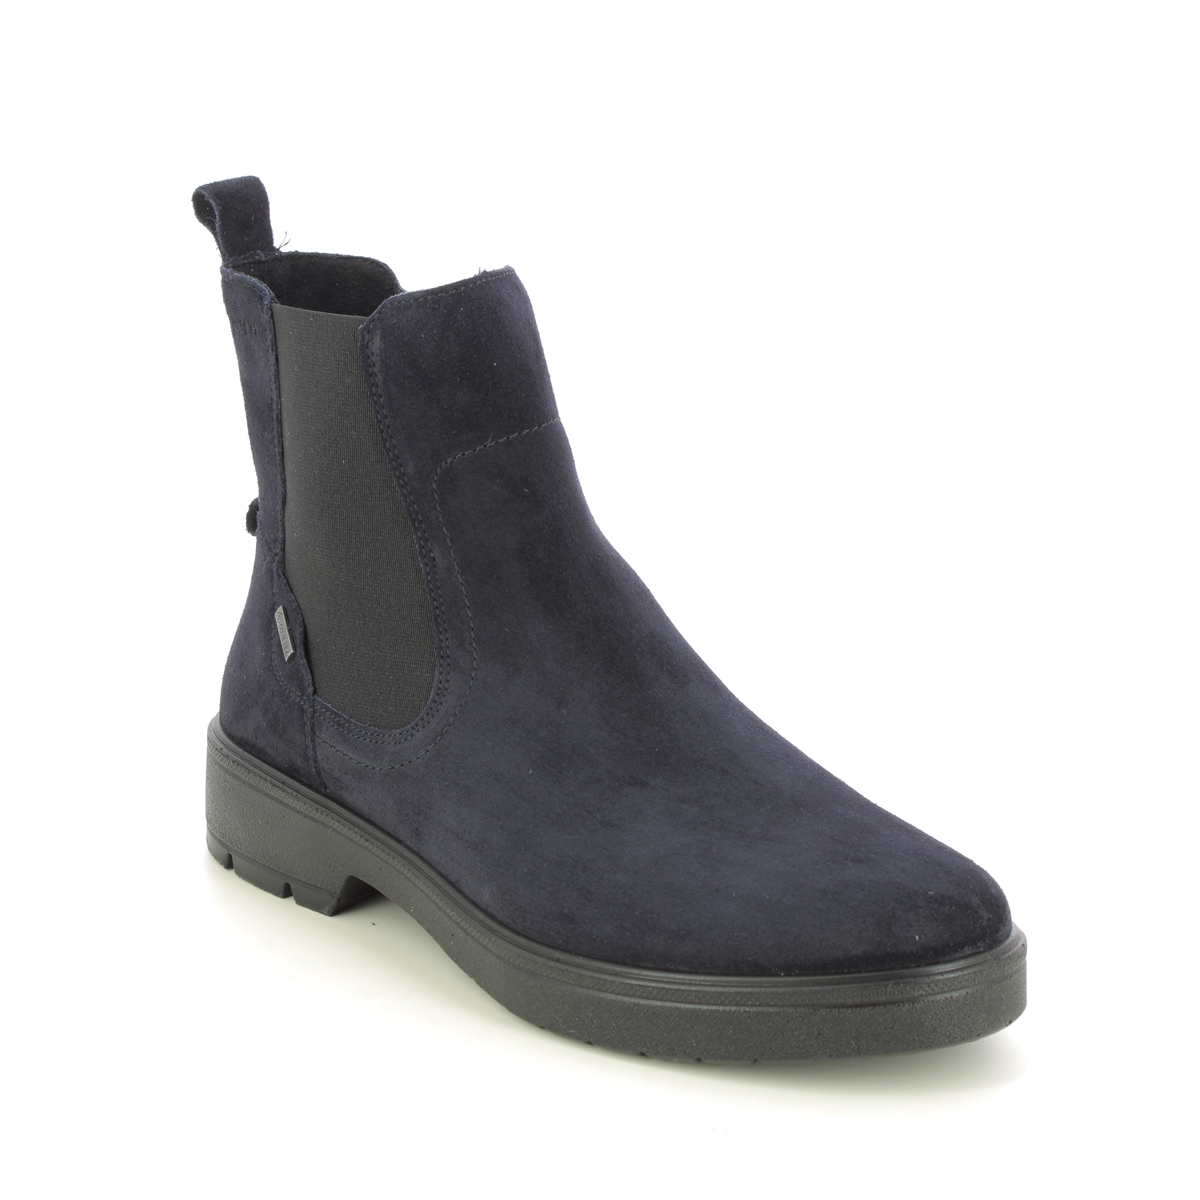 Legero Mystic Chelsea Gtx Navy Suede Womens Chelsea Boots 2000191-8000 In Size 4 In Plain Navy Suede